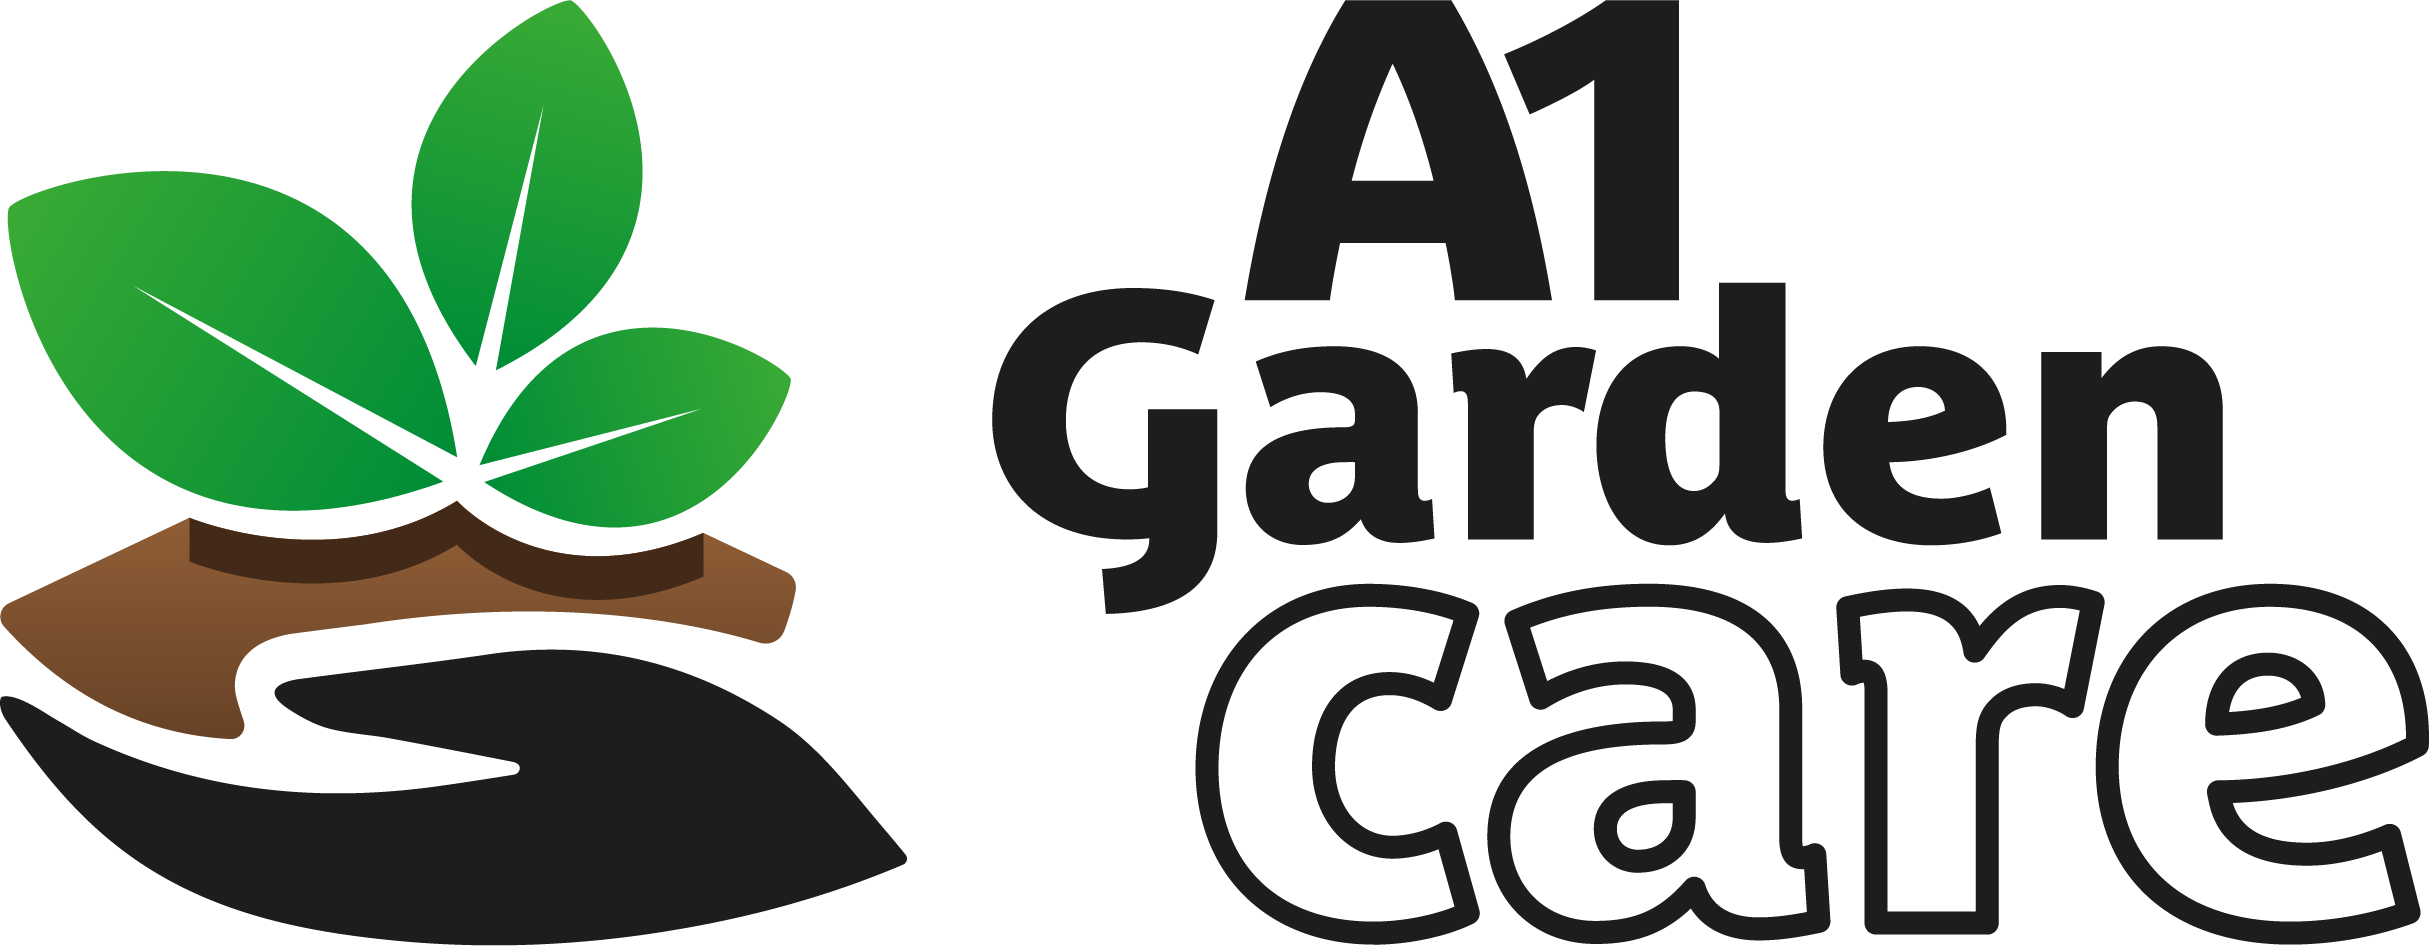 Logo of a1 garden care featuring stylized black text and a green leaf cradled in a brown hand, symbolizing eco-friendly gardening services.